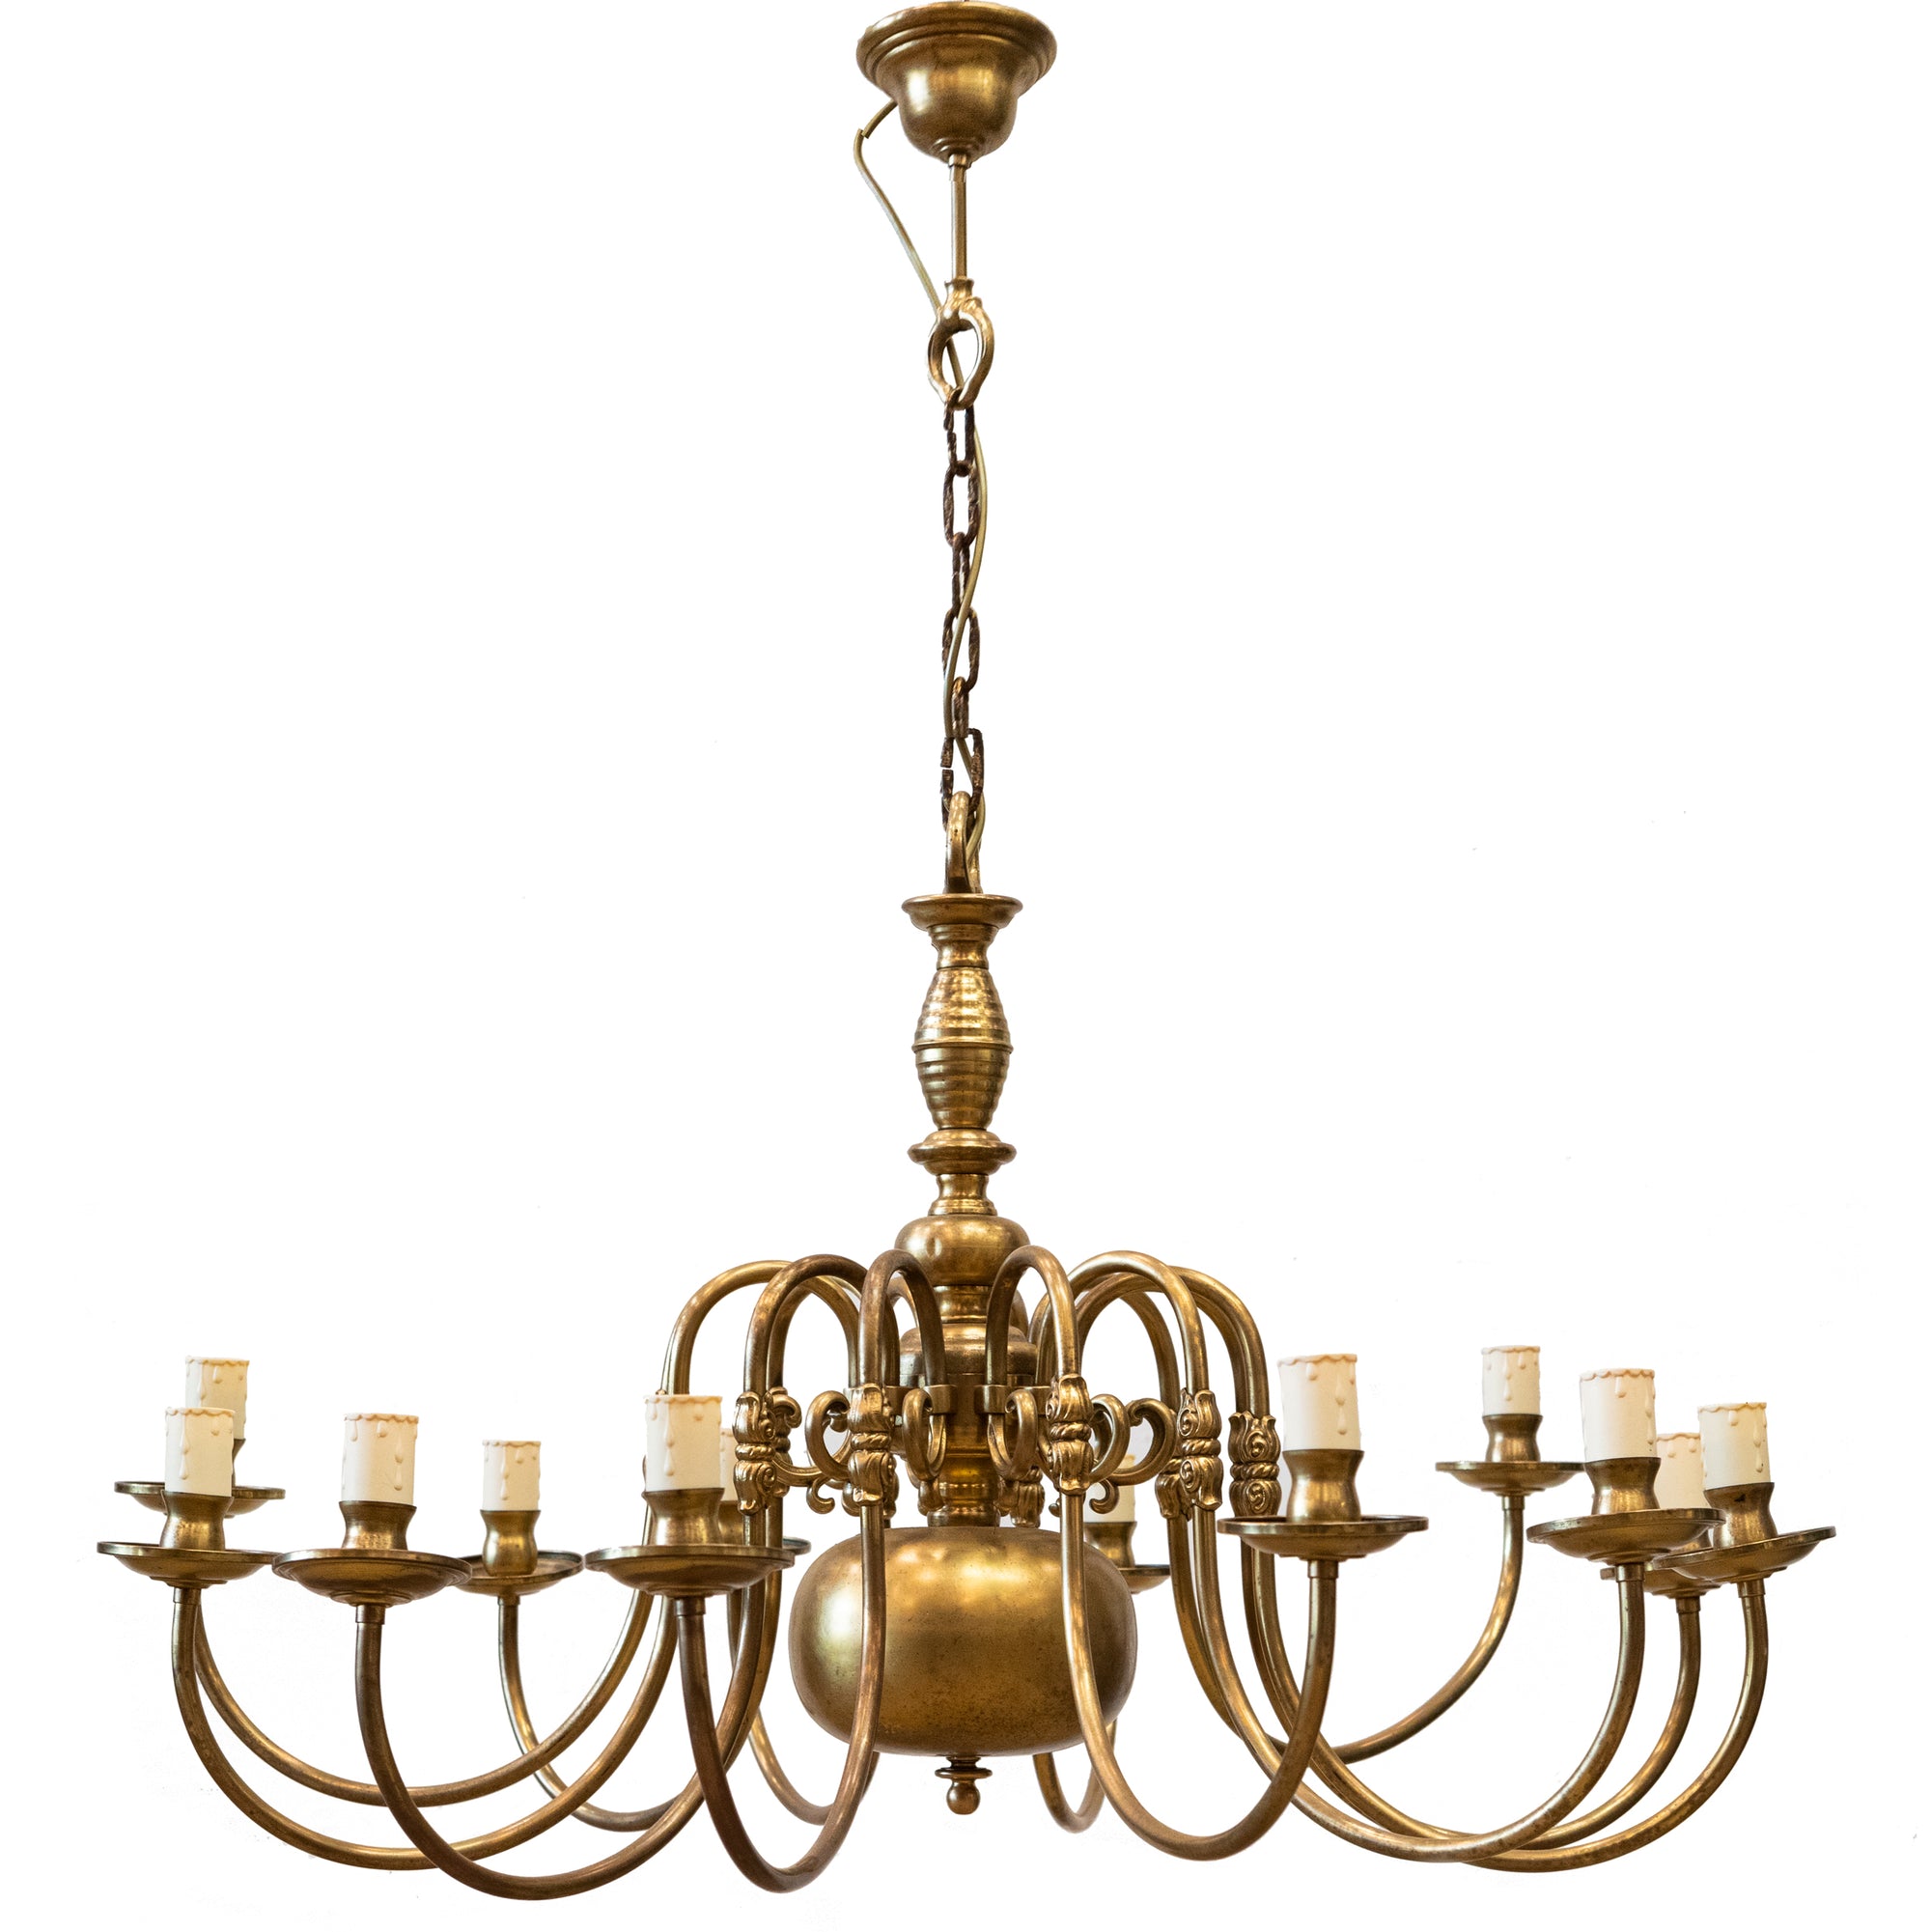 Large Reclaimed Brass Chandelier | 12 Arm | The Architectural Forum